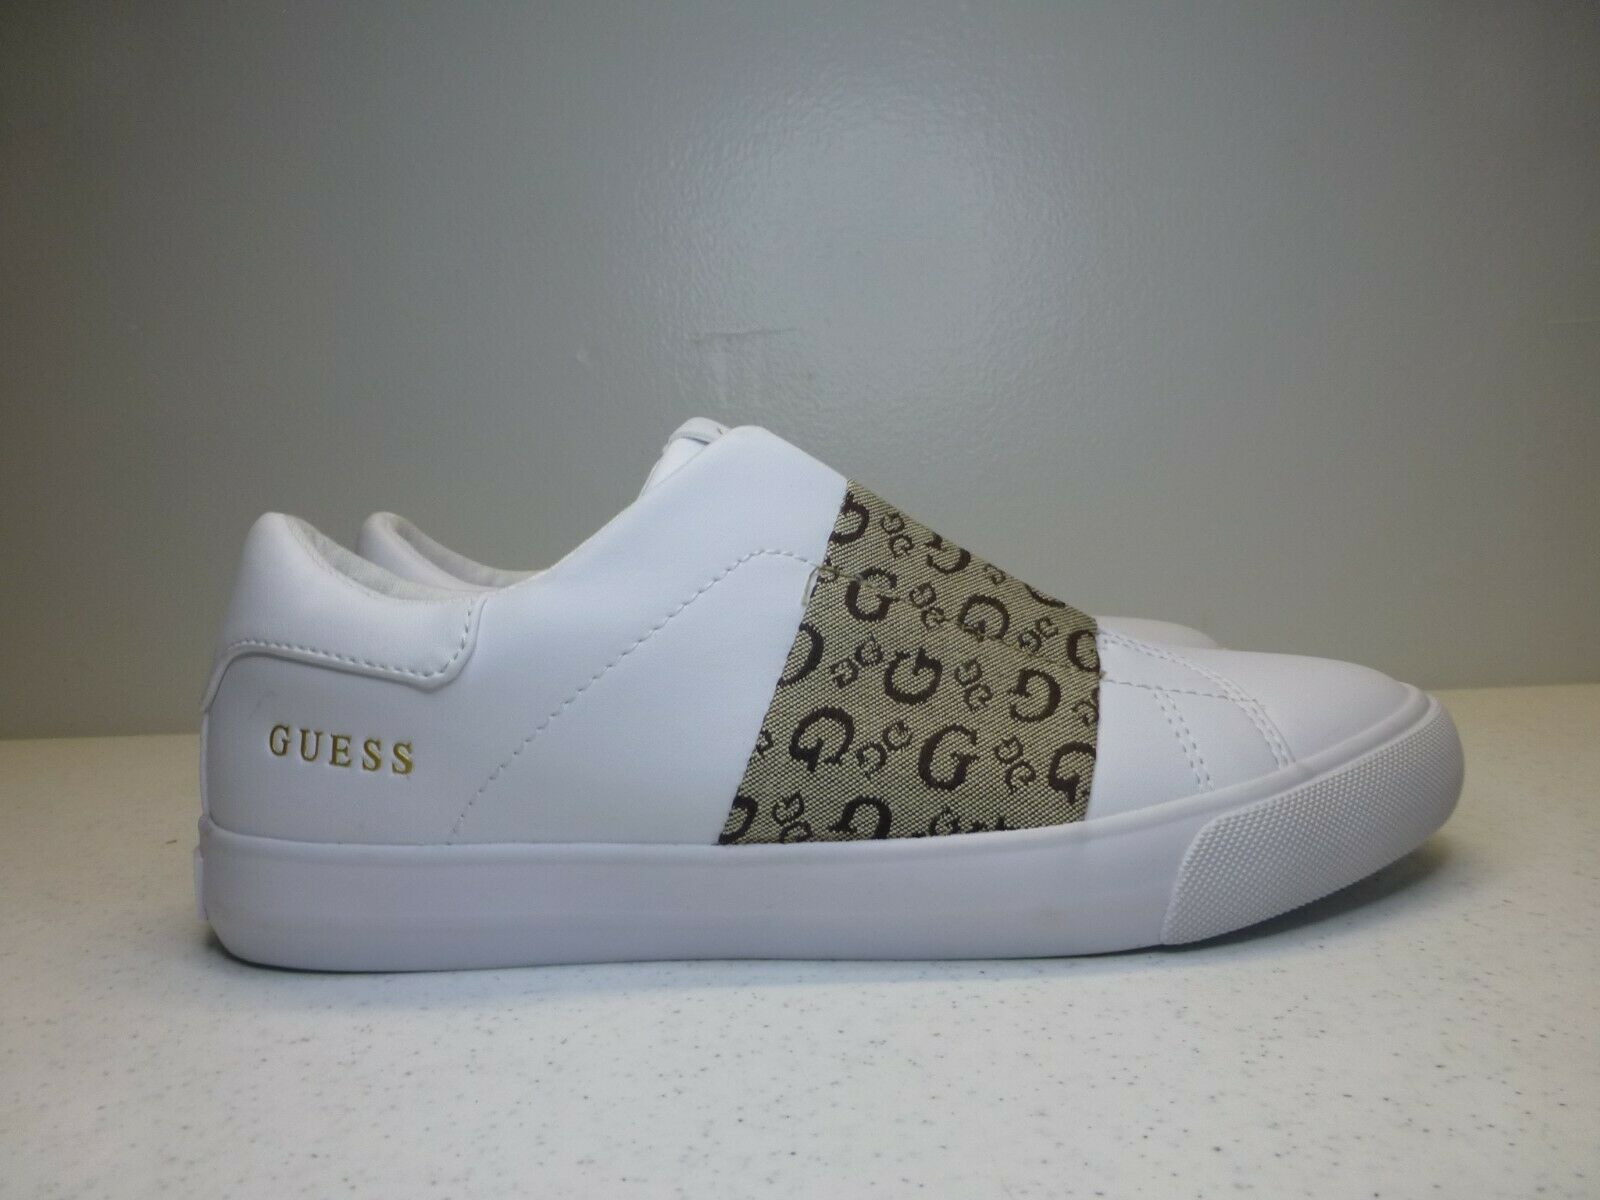 Guess Women's Shoes Sneakers White Leather Size 7.5 M WGSOON-R